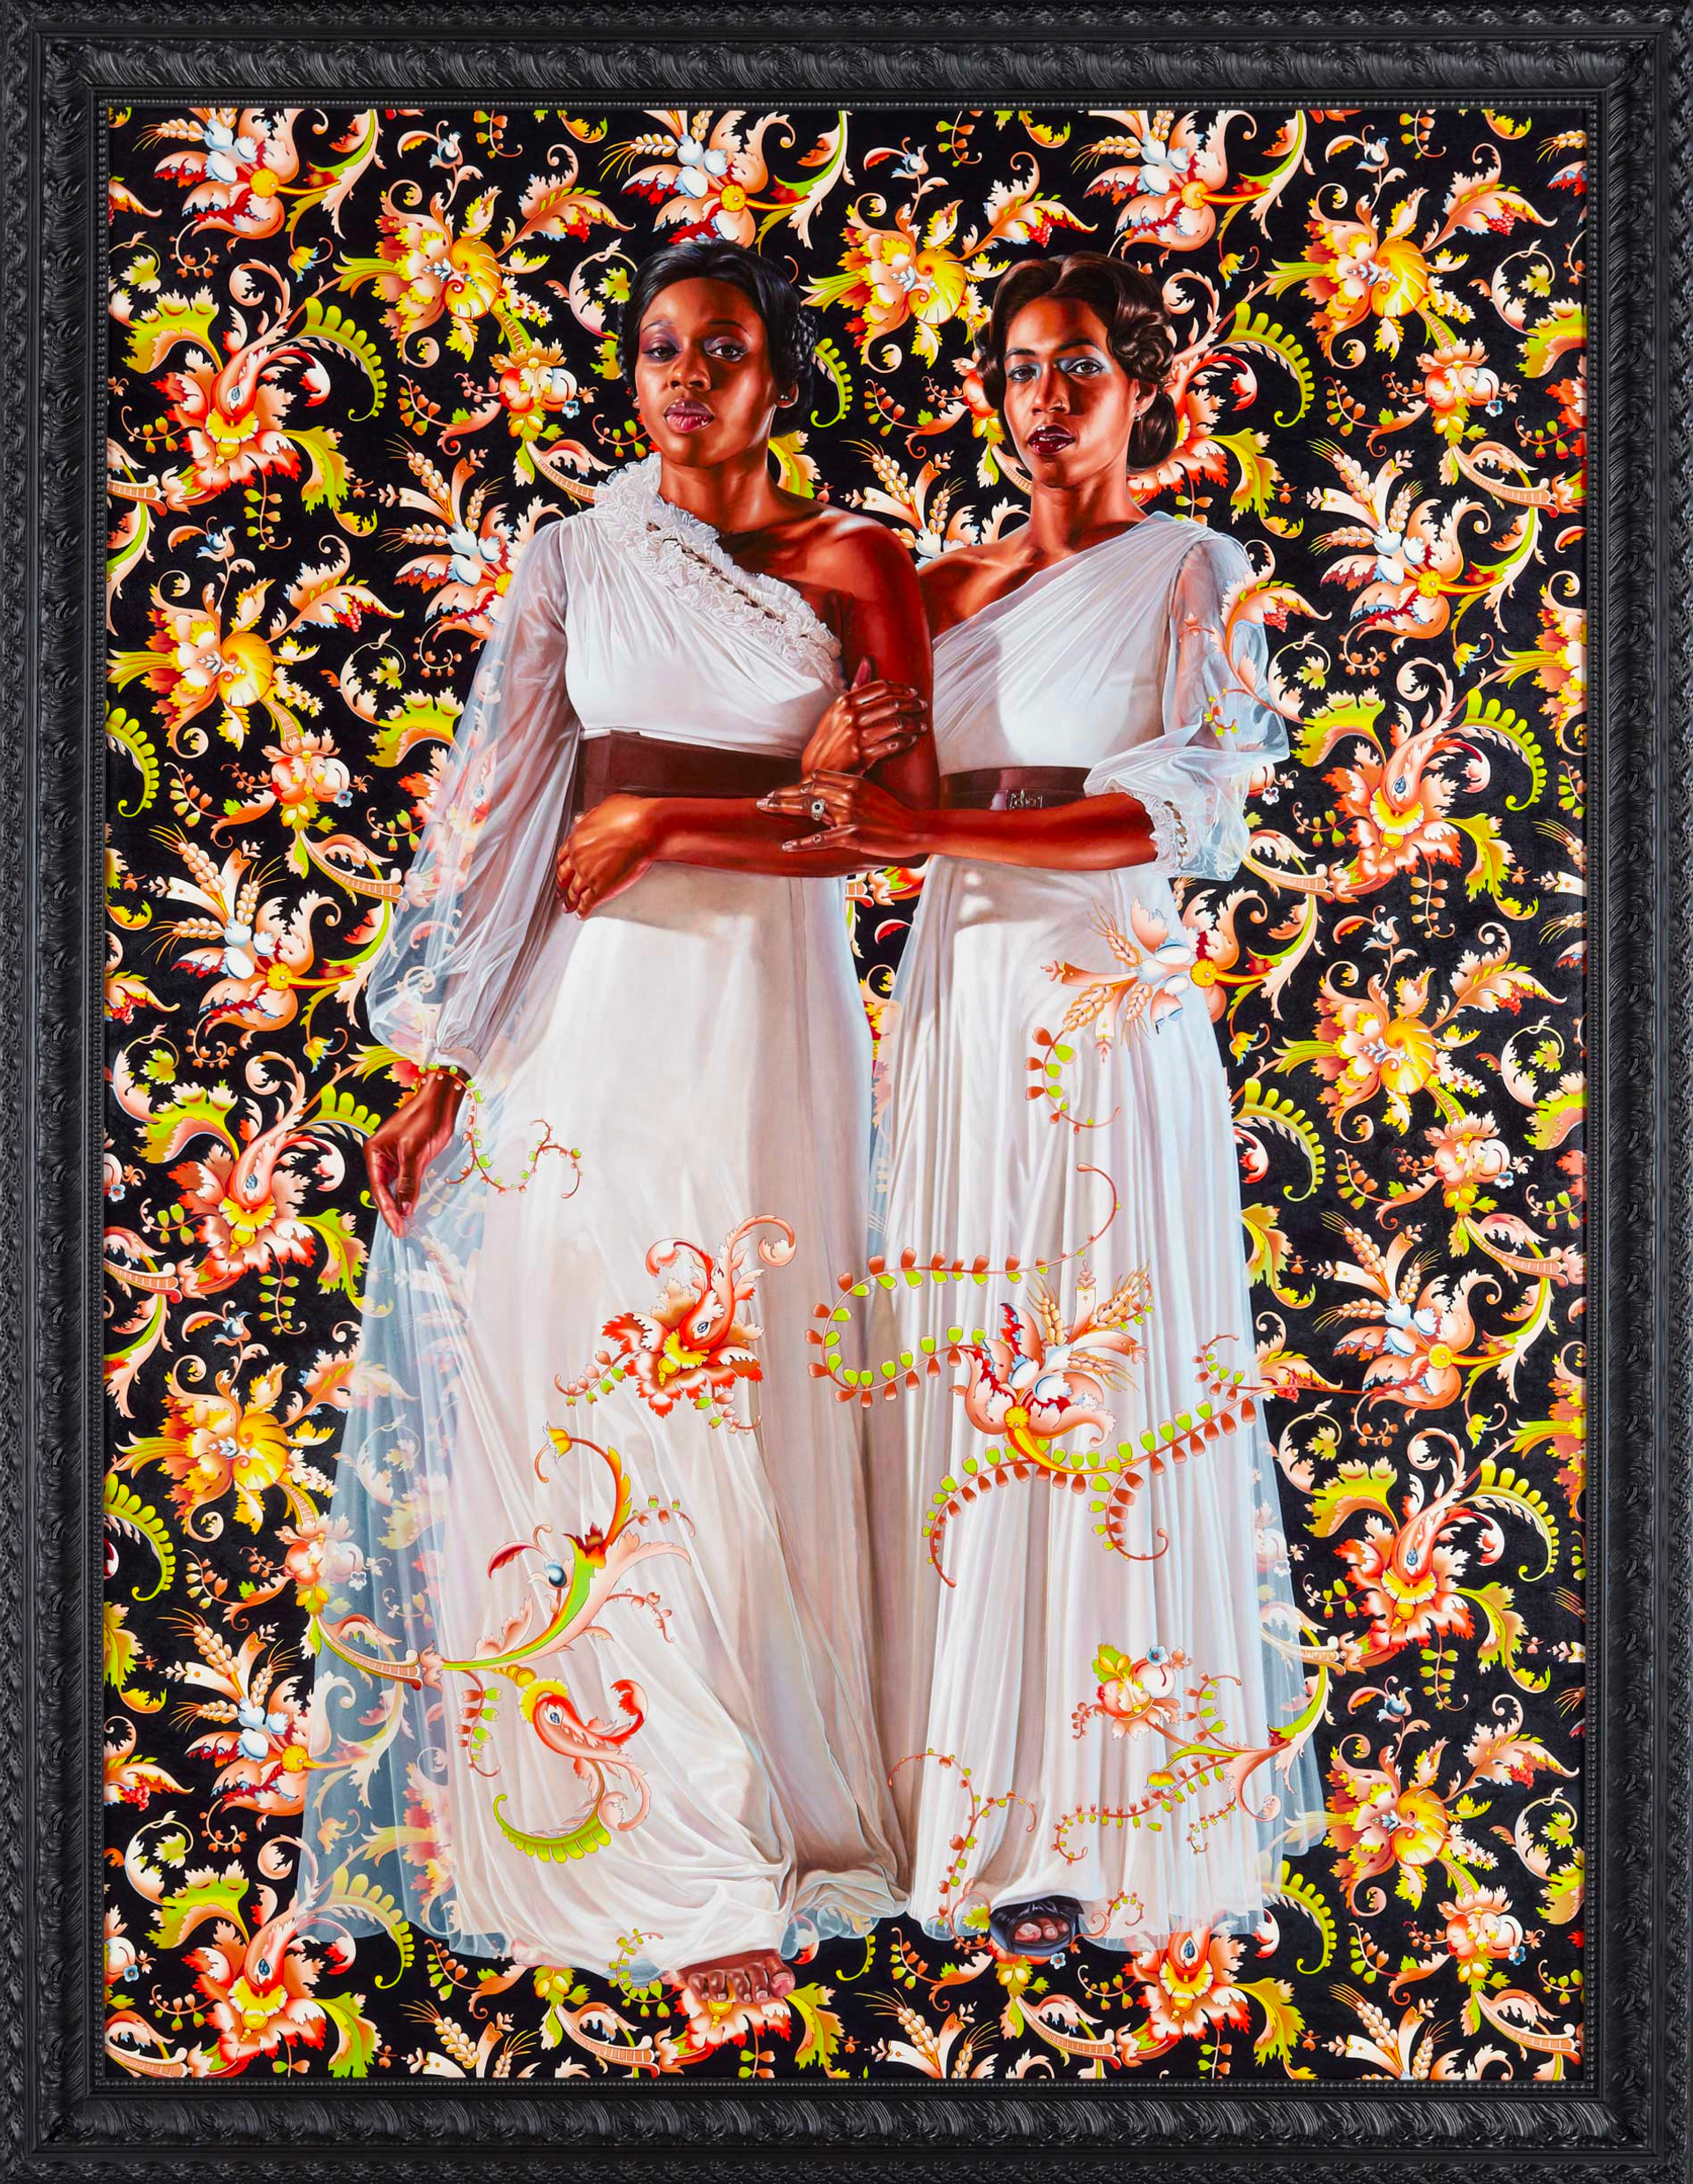 Two tall black women in white ball gowns, crossing over their shoulders, stand side by side. One woman extends her dress outward while both link arms and make eye contact with the viewer. They are positioned against a black background with ornate pink, yellow, and green floral foliage.